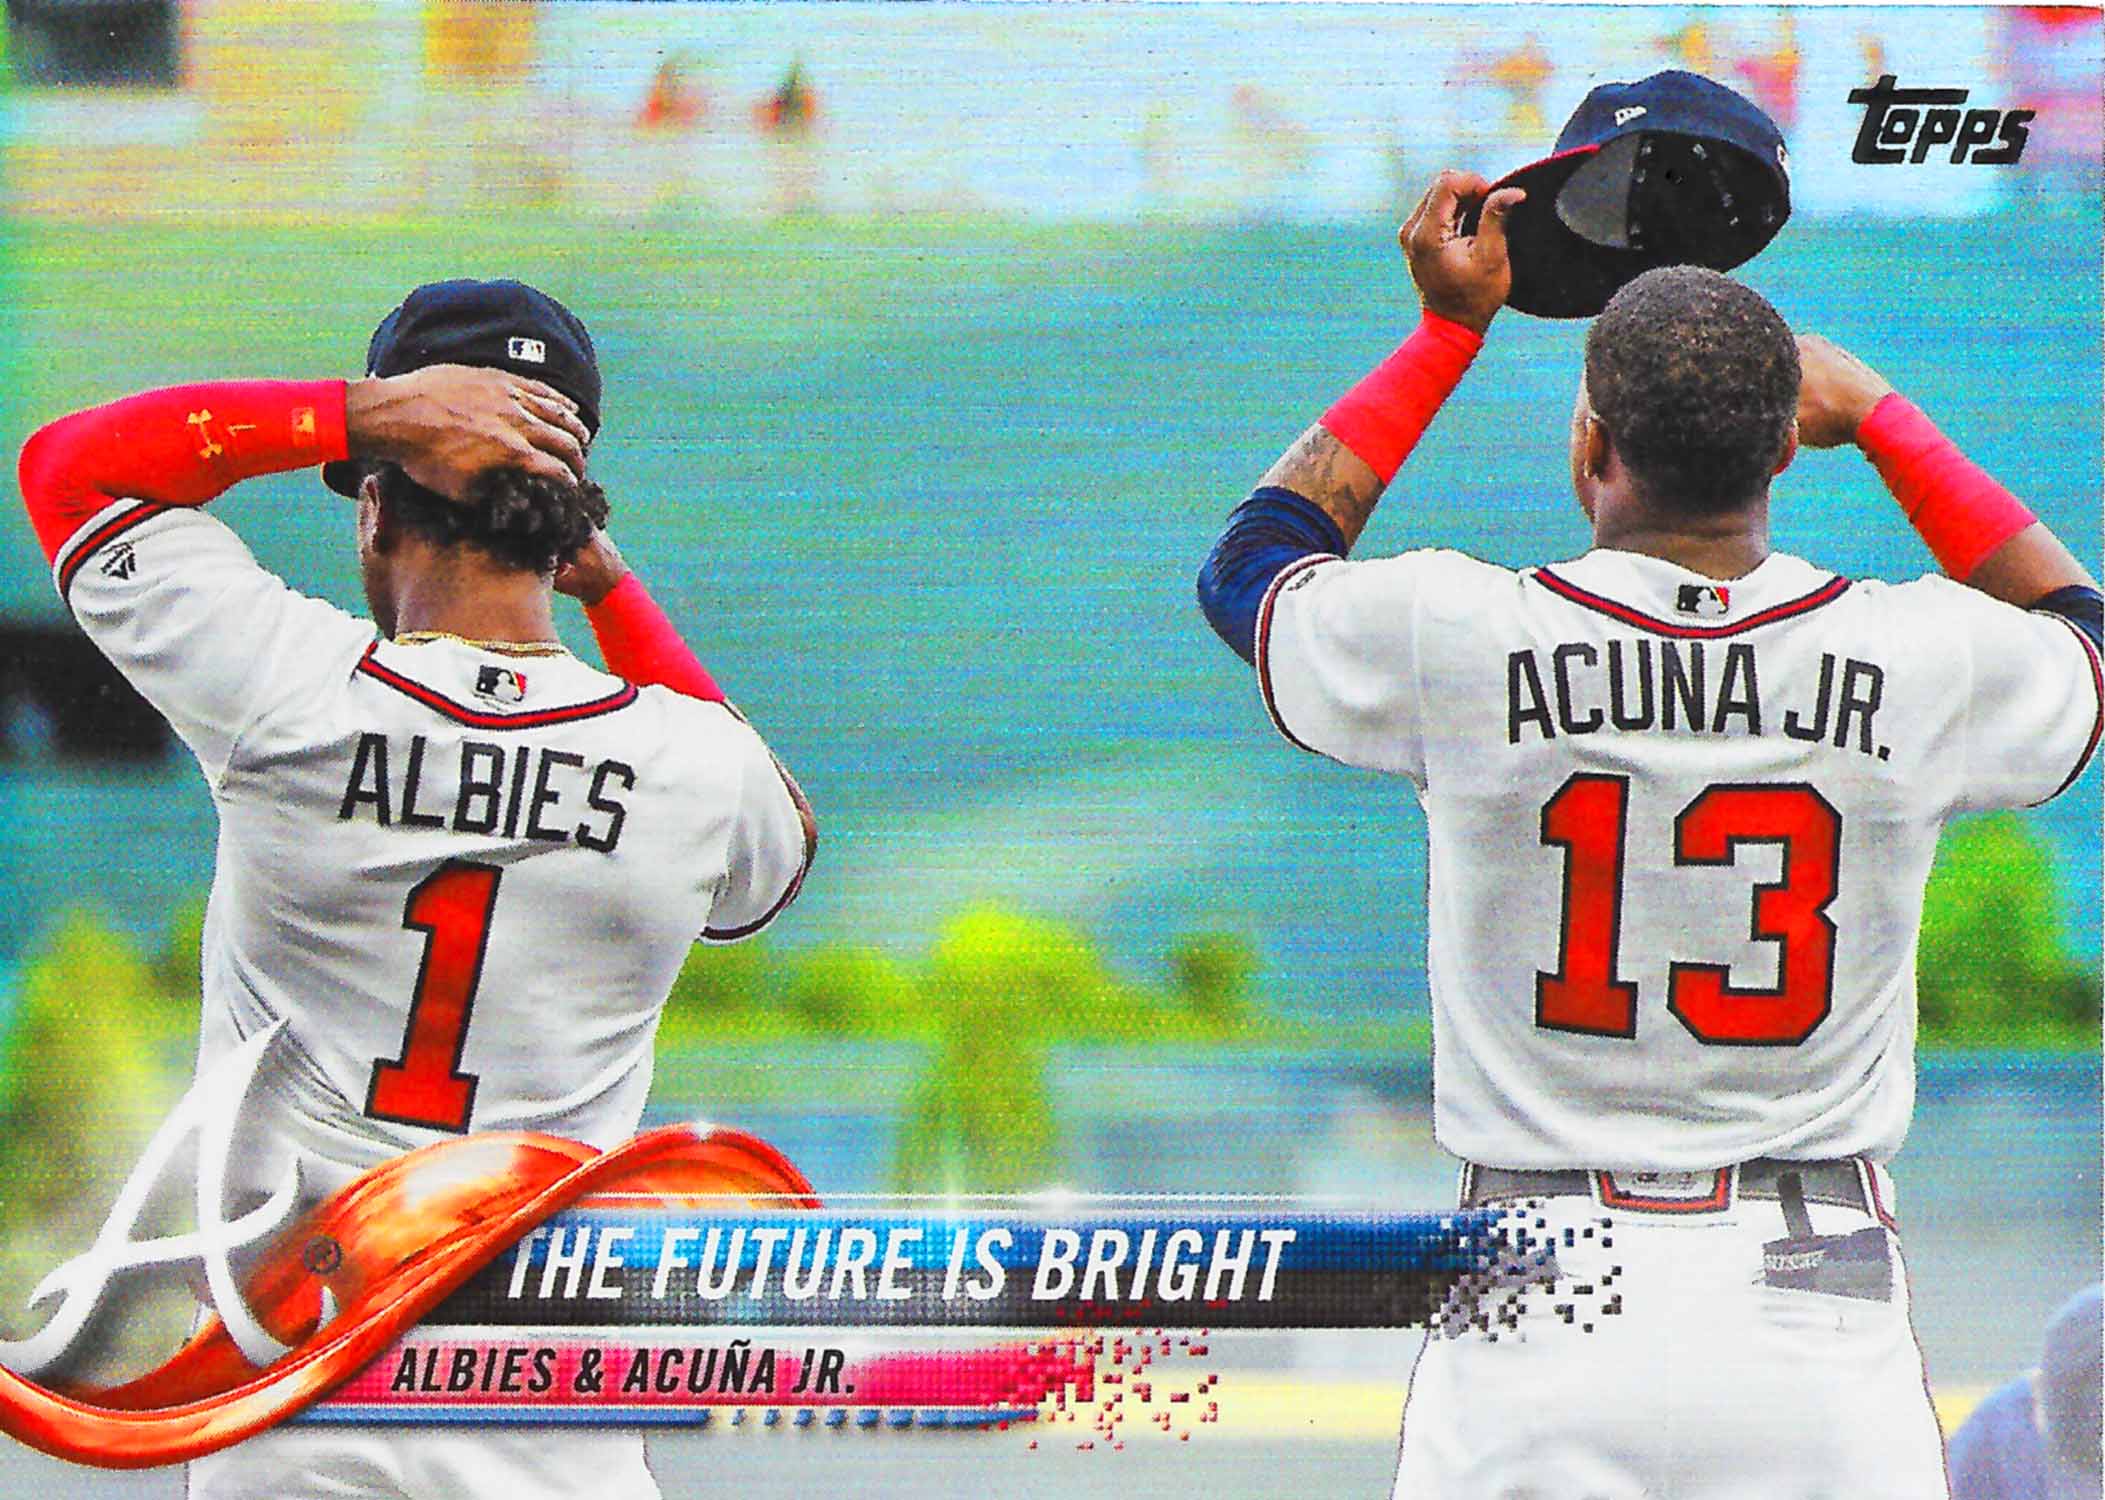 2018 Topps Update Rainbow Foil The Future is Bright